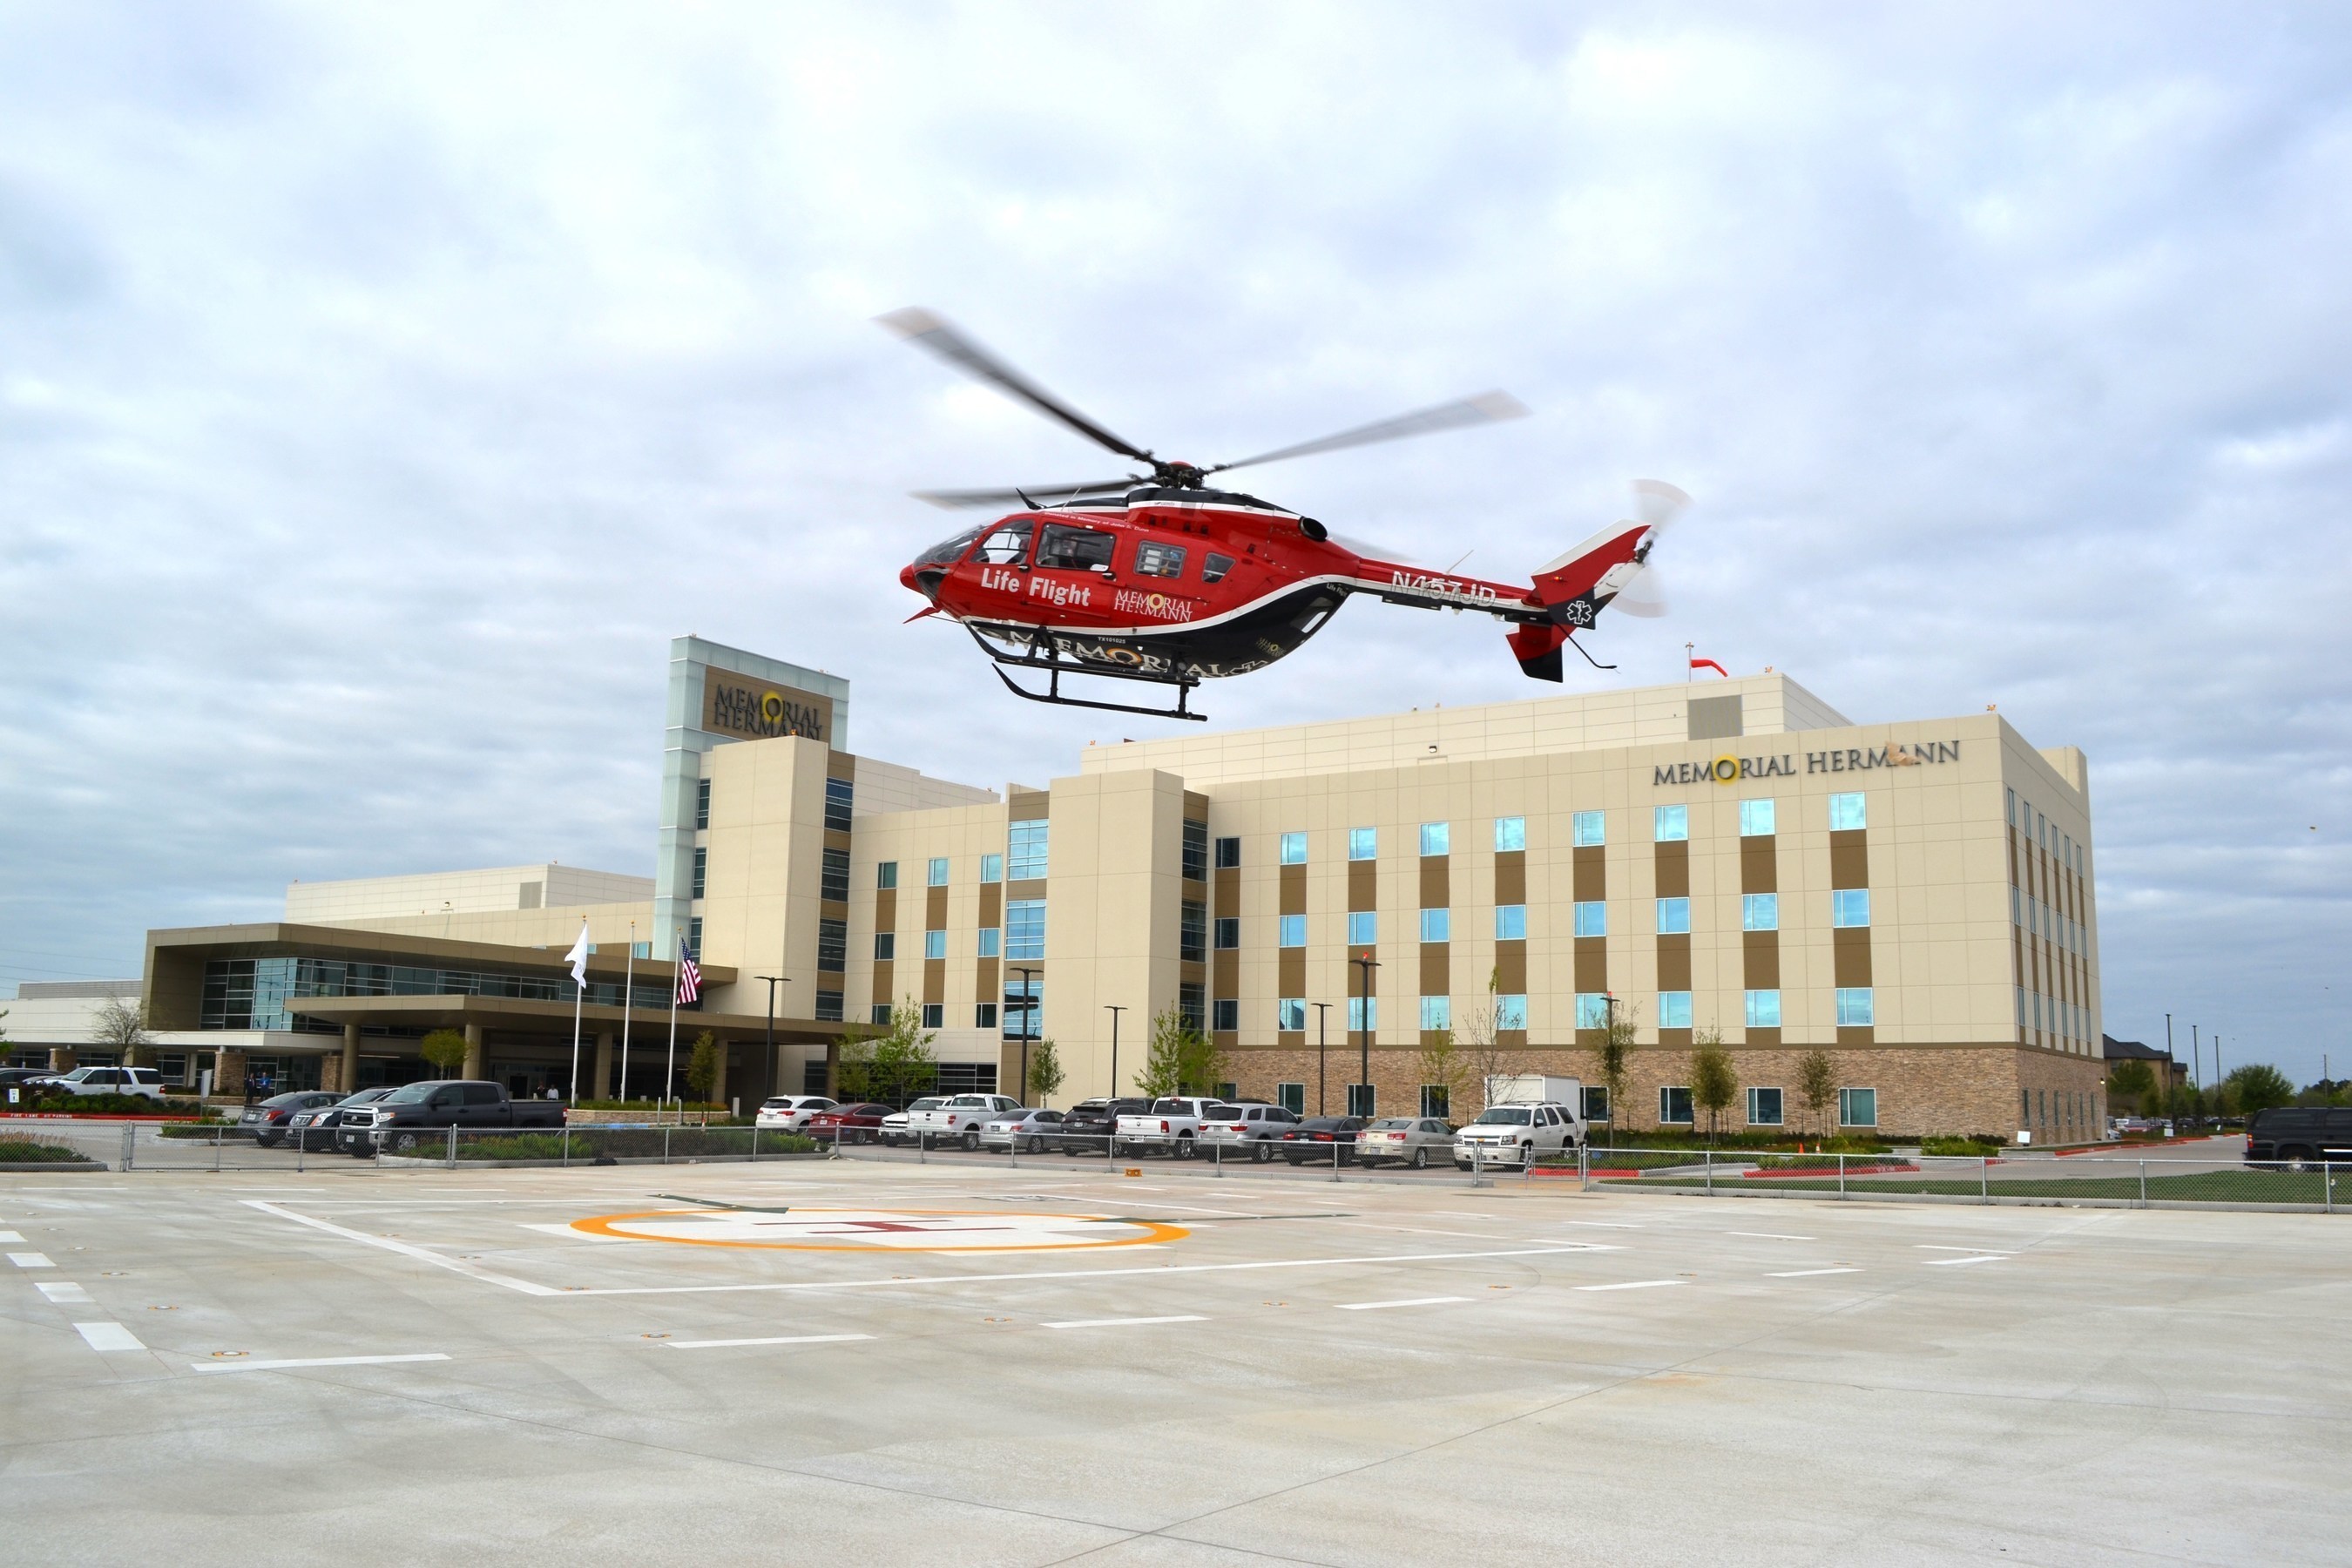 Memorial Hermann Pearland Hospital officially opens its doors offering a number of high-quality services and specialties to Pearland, Alvin, Angleton, Manvel and surrounding communities.